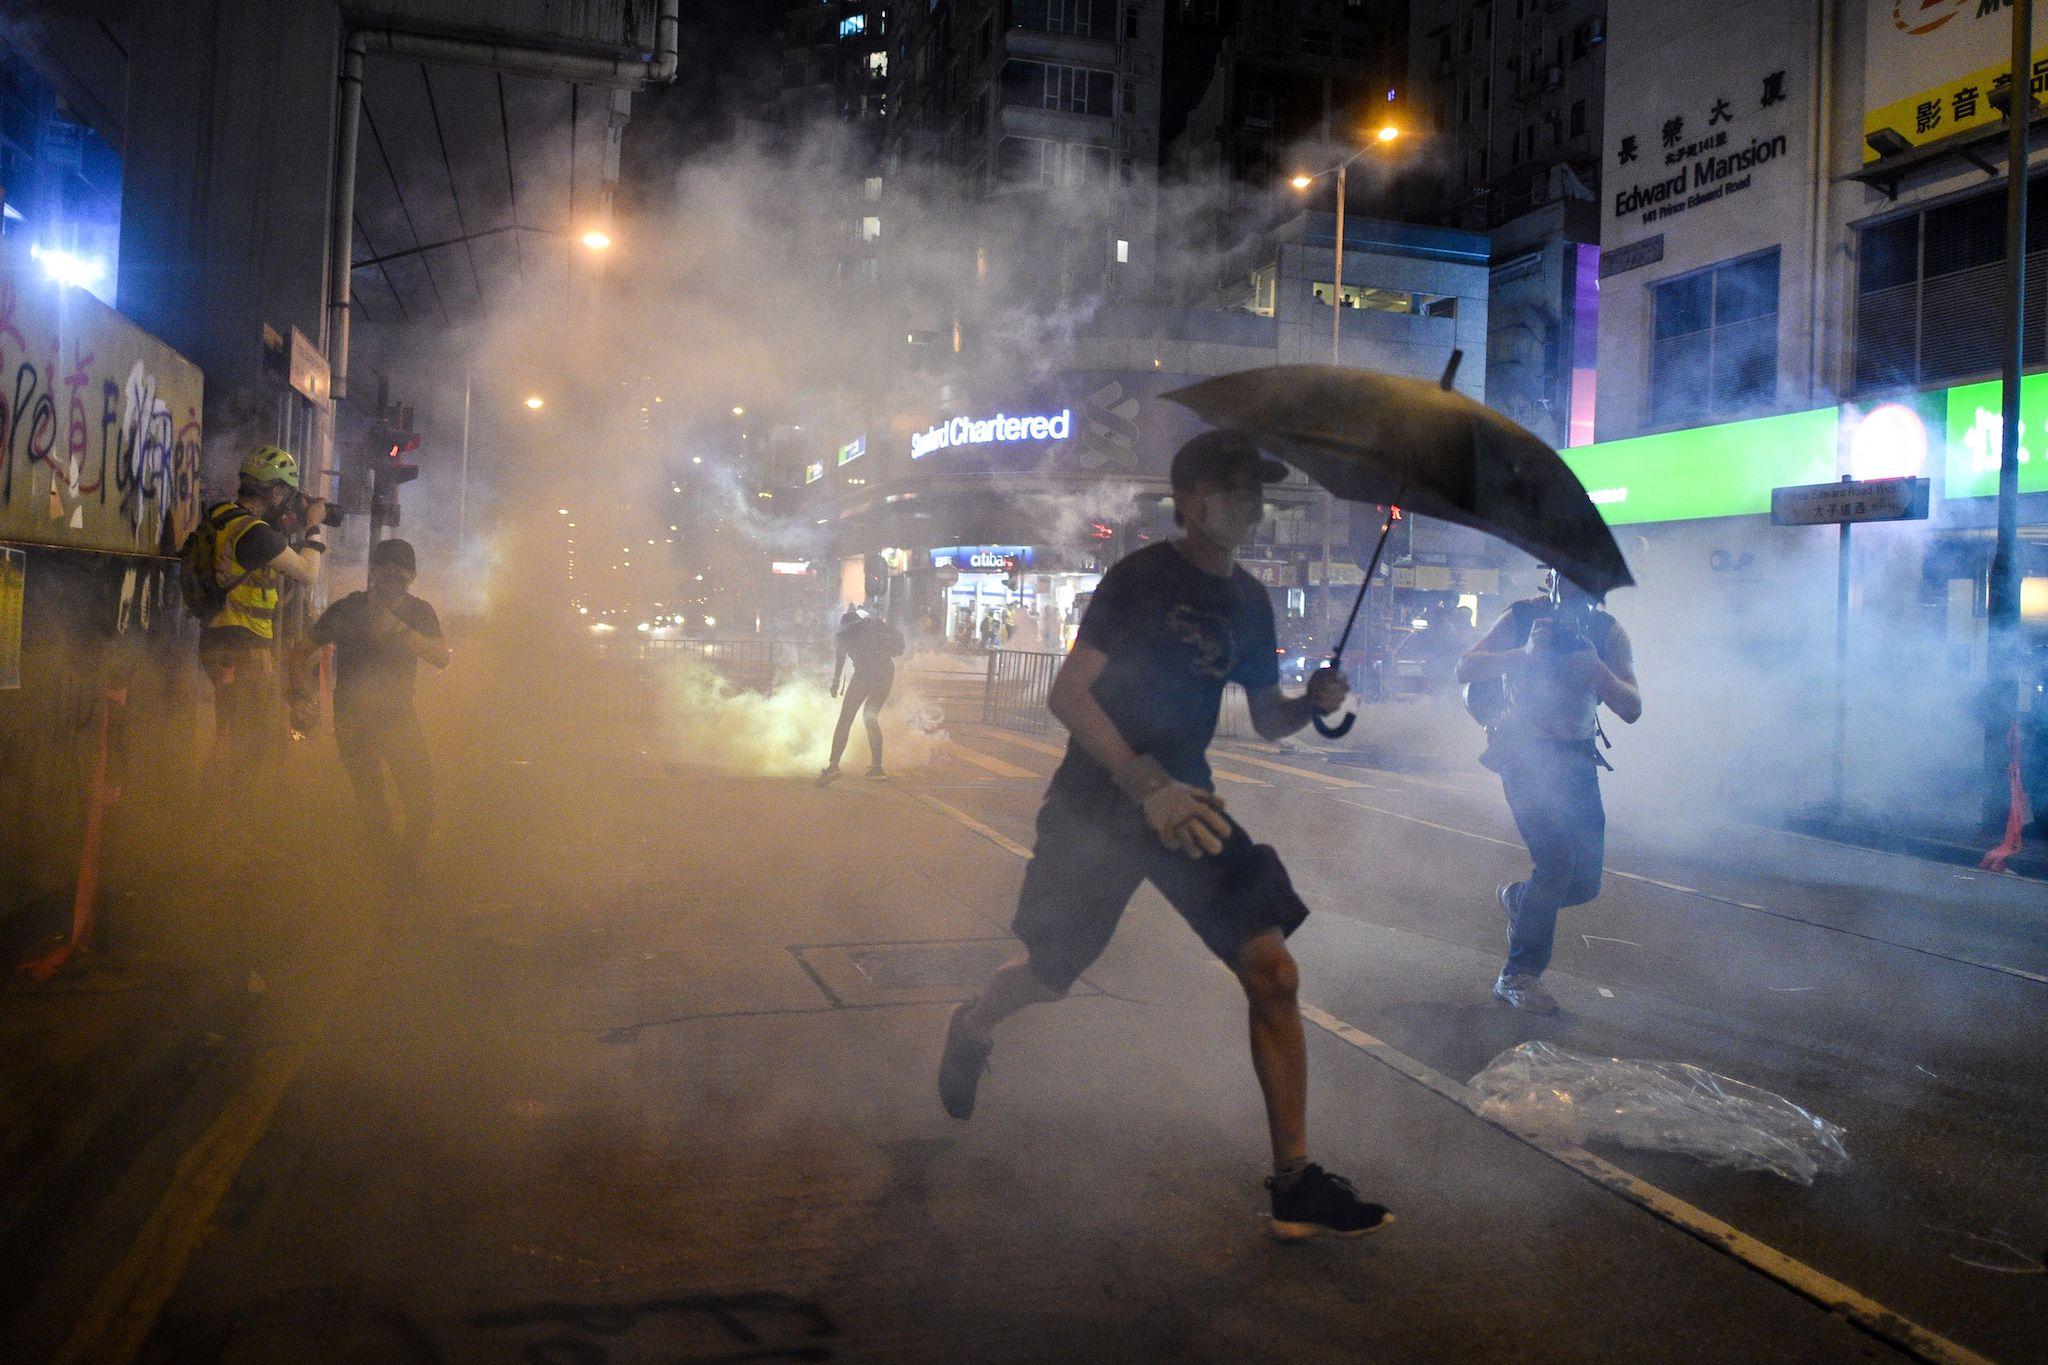 Protesters react after police fired tear gas in the Mong Kok district in Hong Kong on October 7, 2019